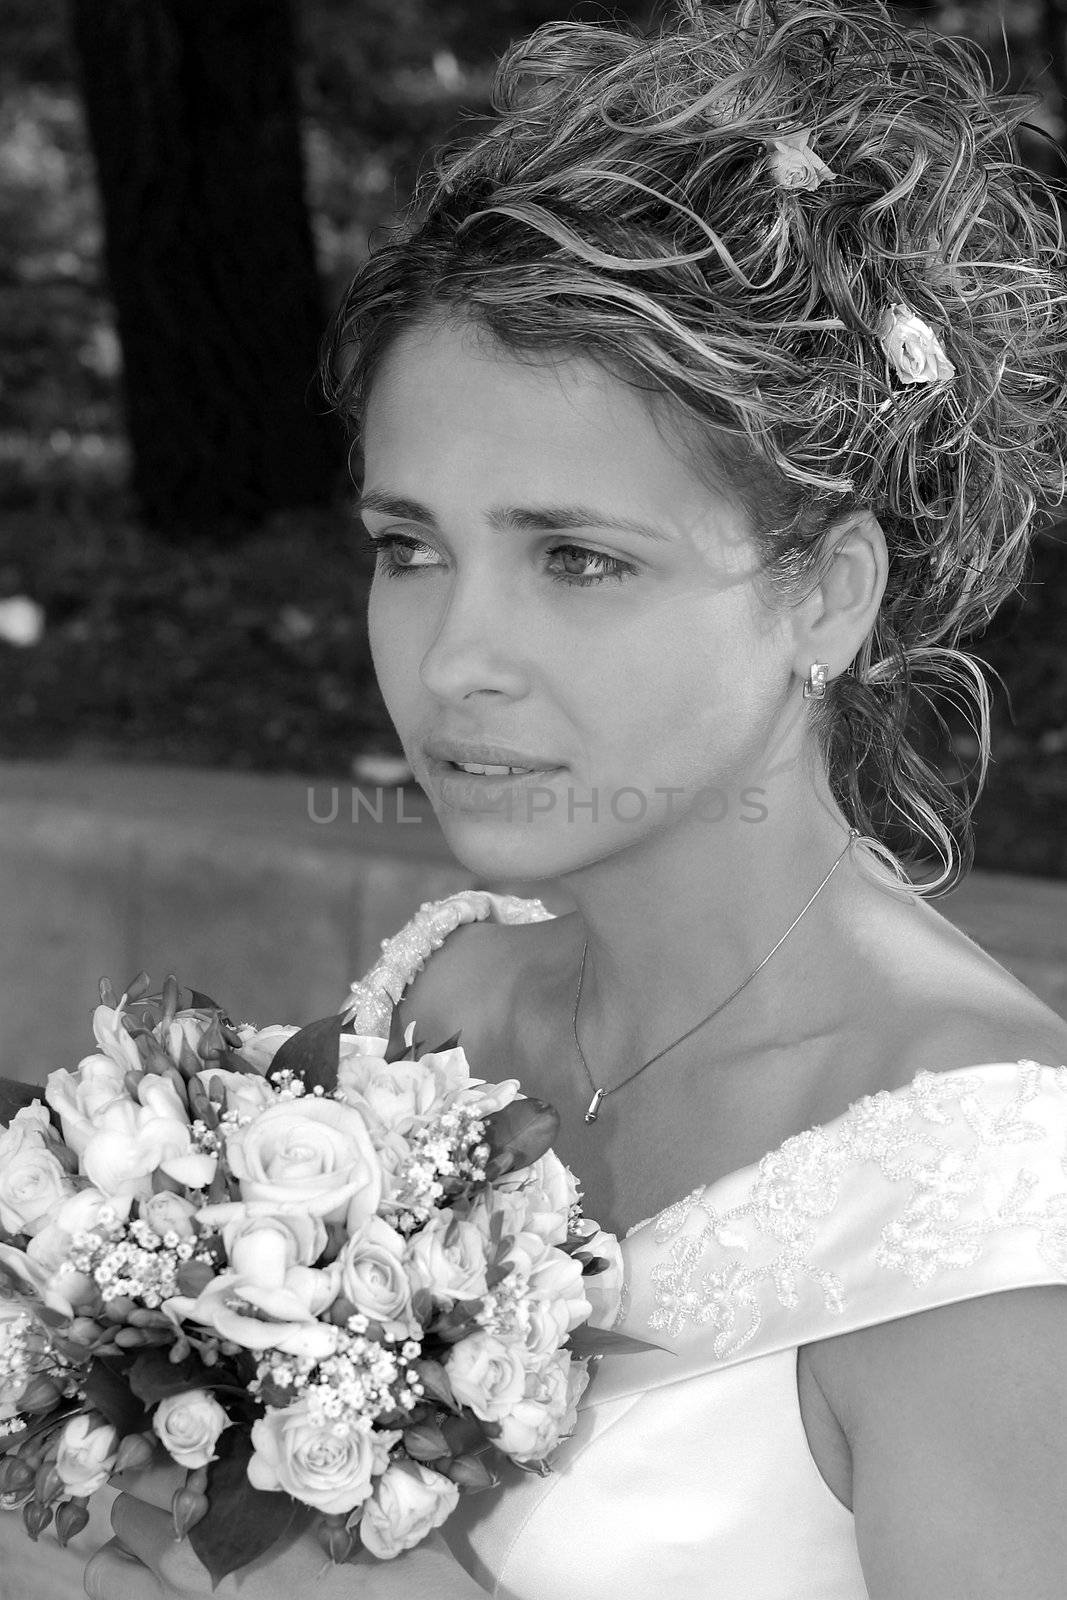 Portrait of young adult bride holding bouquet of flowers.